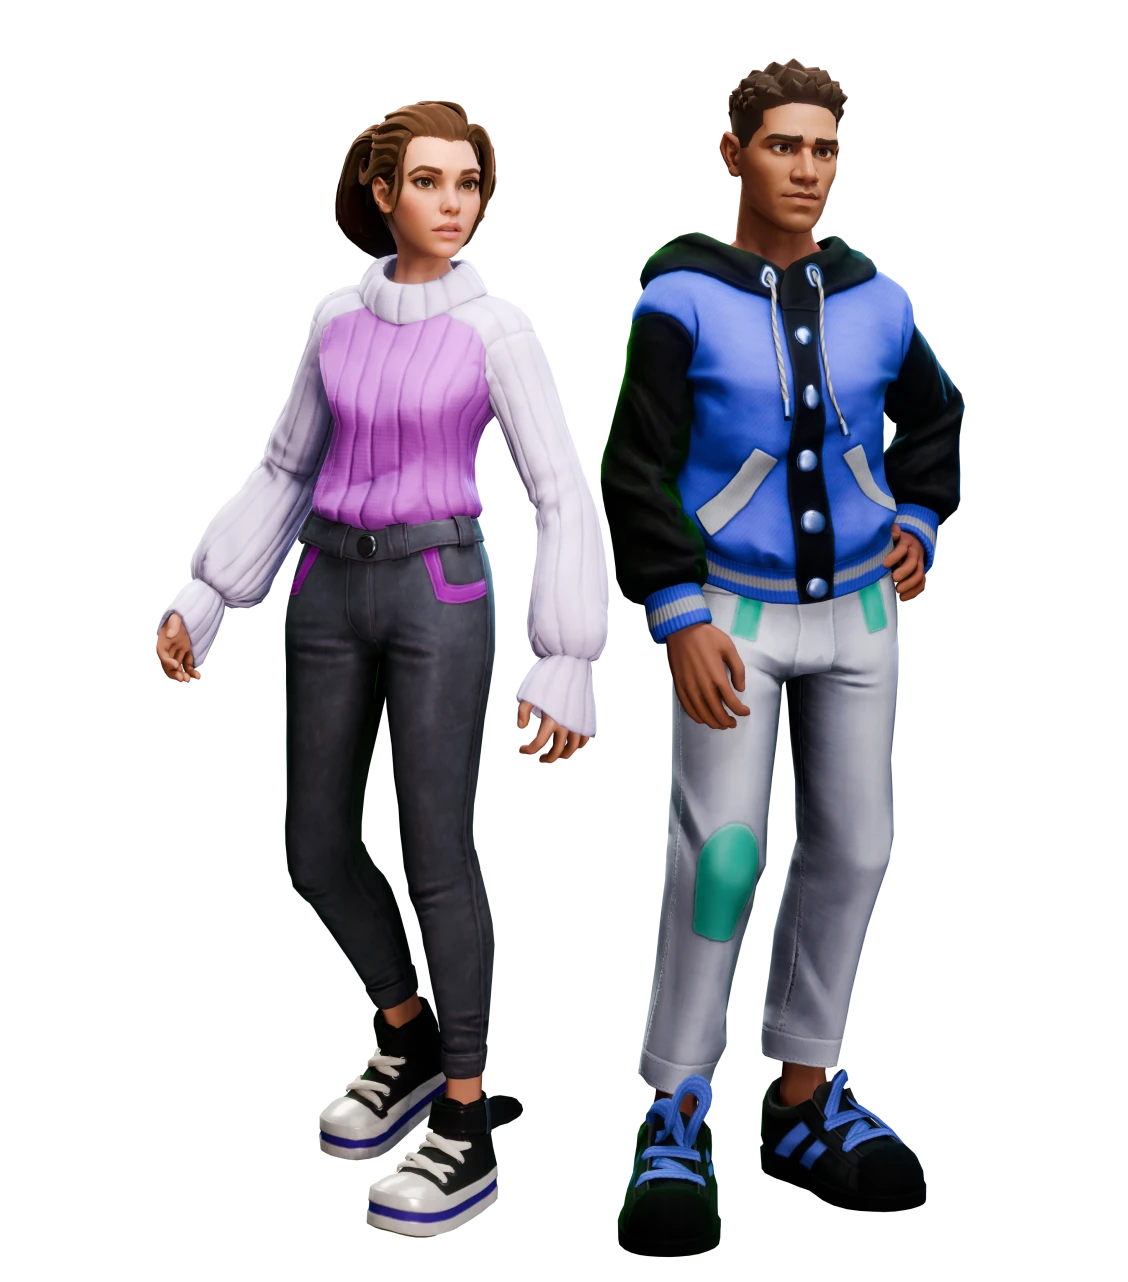 Two Noice 3d avatars standing shoulder to shoulder with custom builds, outfits and other traits